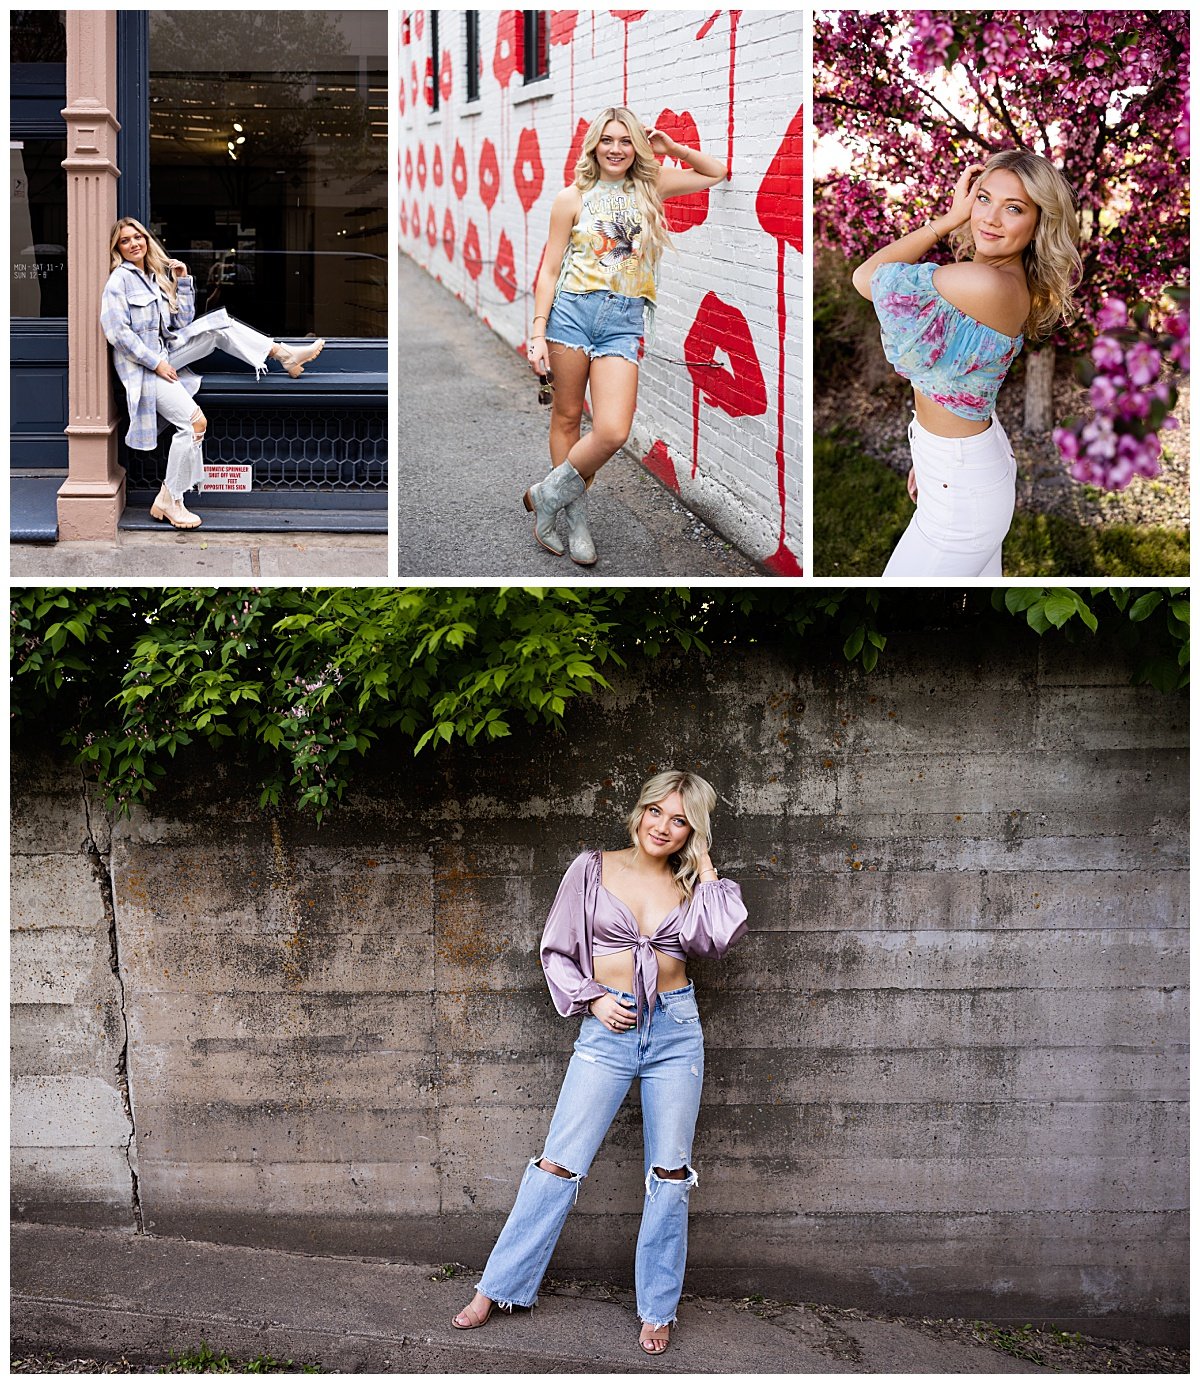 Propped against a brick wall painted white with red lips, a young woman wearing cowboy boots, cut off jeans, and a tank top poses in Nashville, TN during a senior photo session.